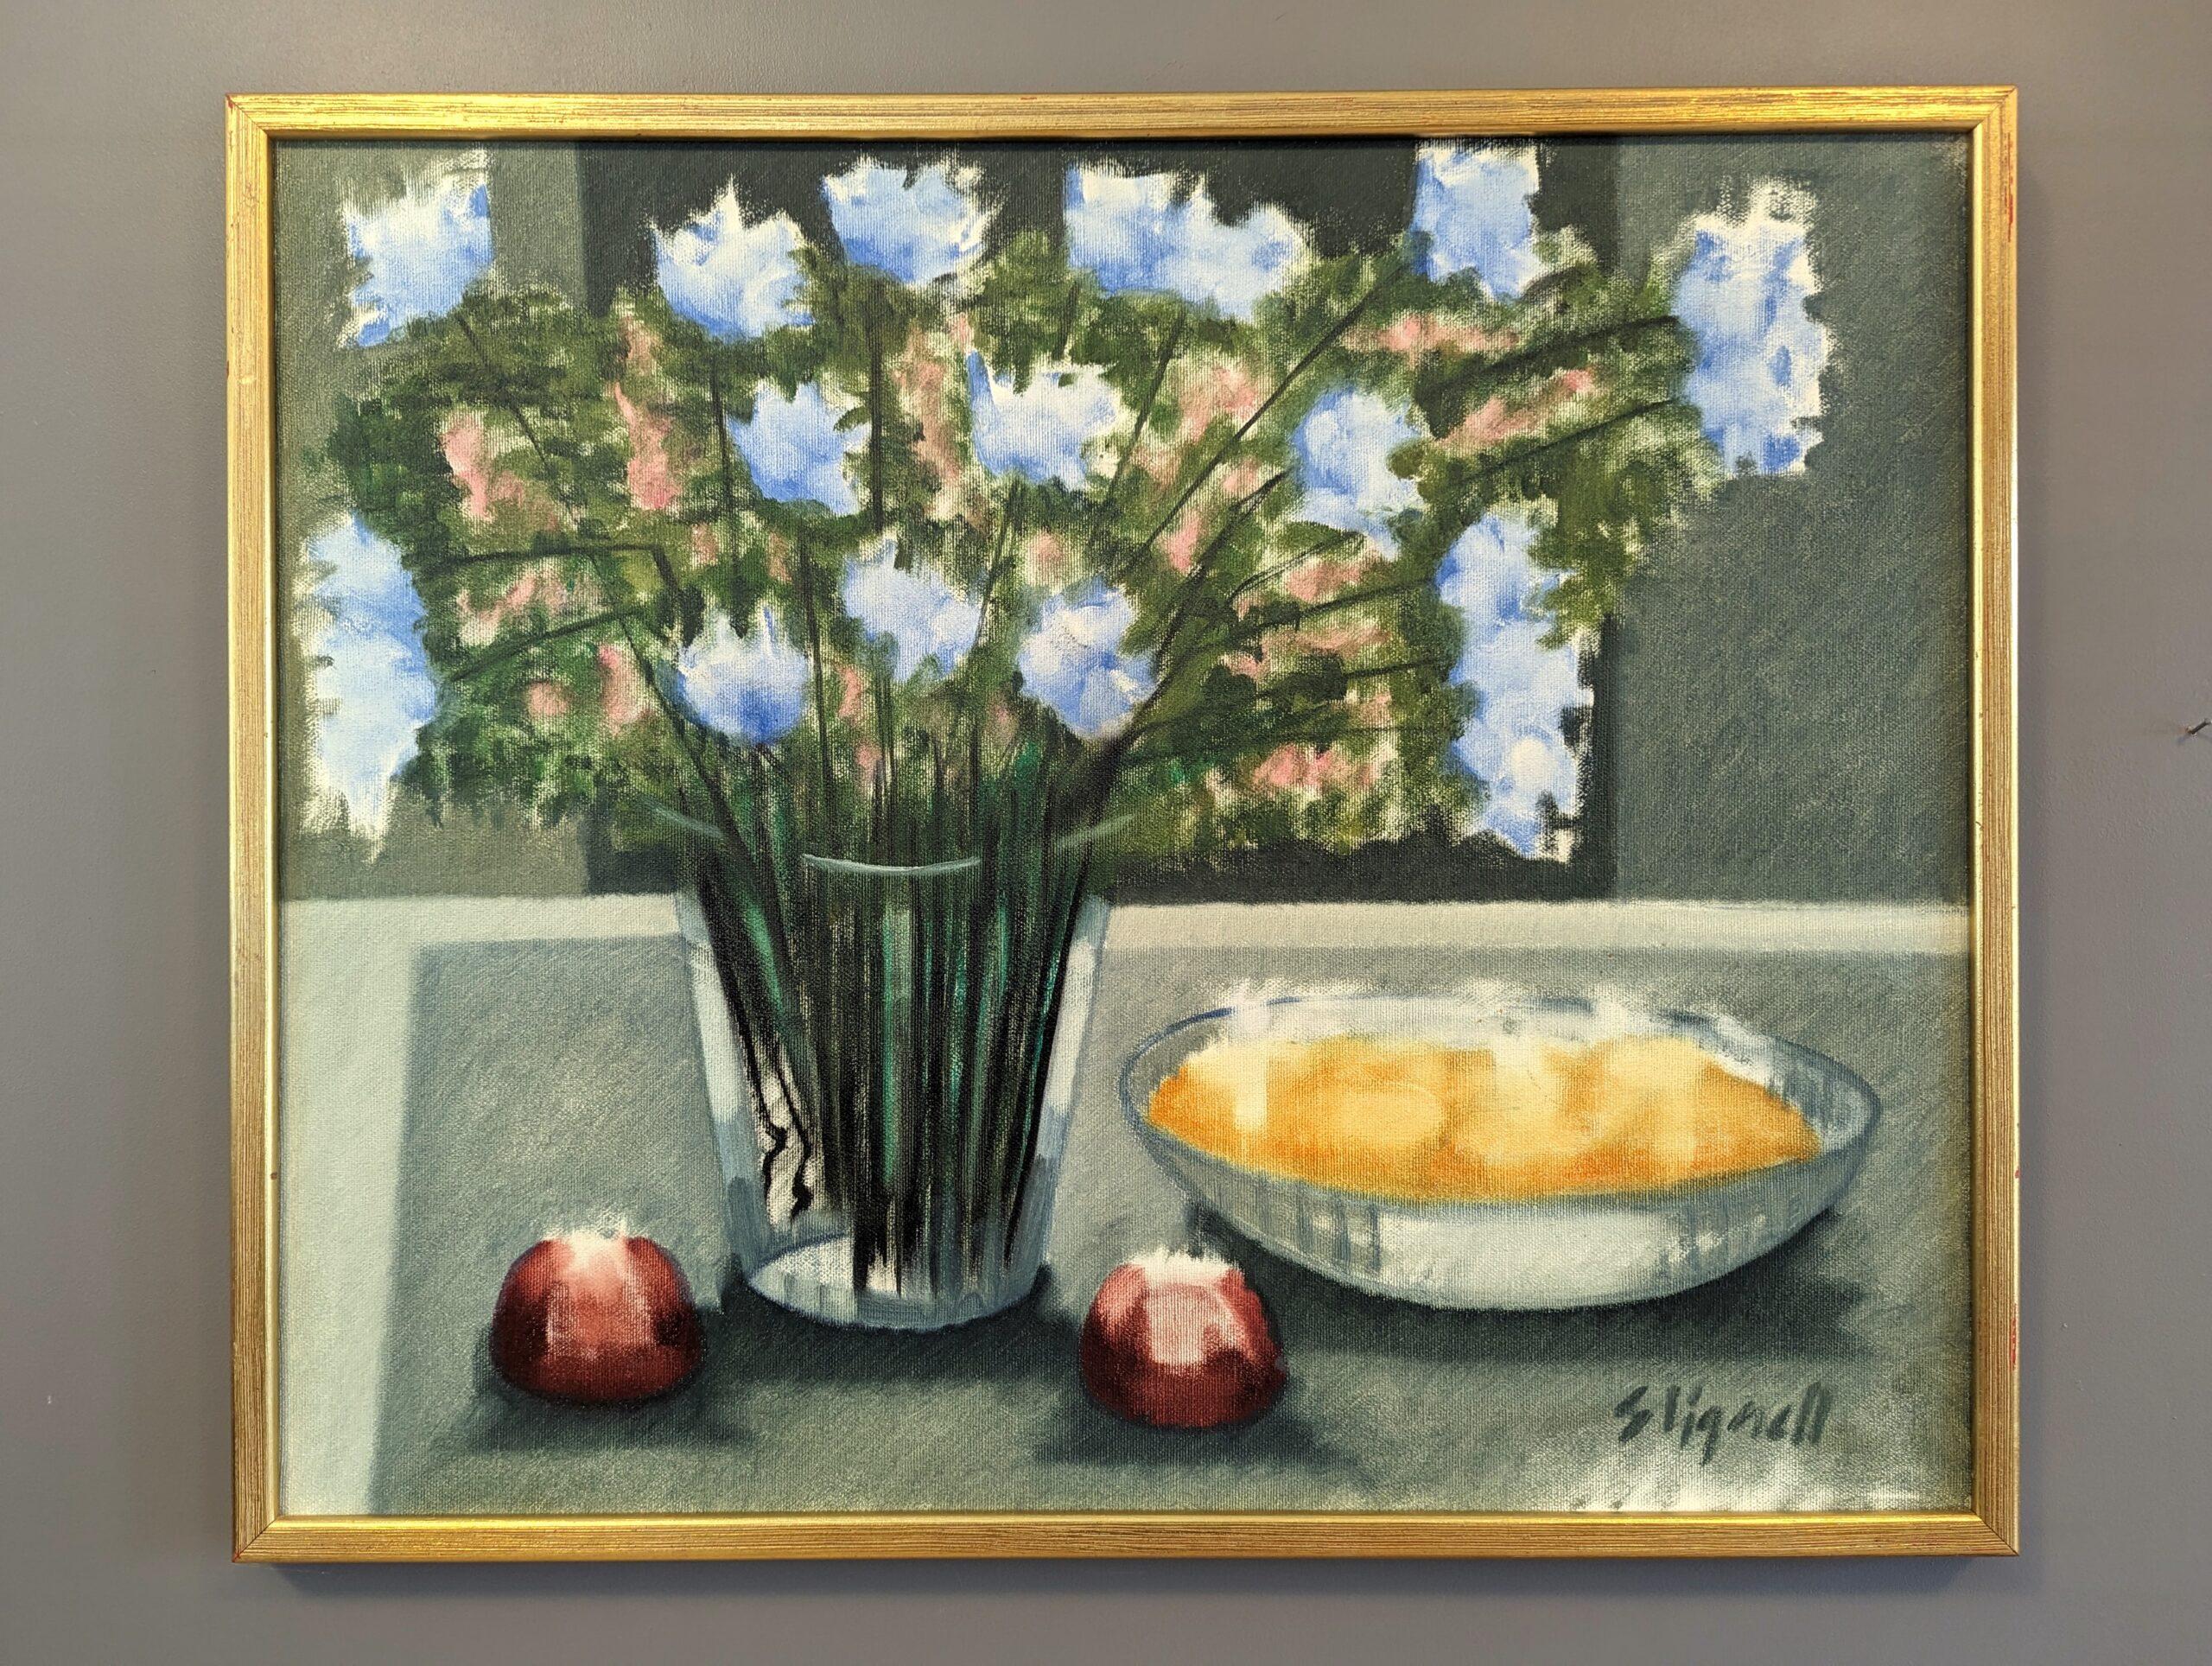 ETHEREAL STILL LIFE
Size: 53.5 x 64.5 cm (including frame)
Oil on Canvas

A soothing and elegant mid-century still life painting, executed in oil onto canvas.

The composition captures a table setting where 2 apples, a bowl, and a large vase of